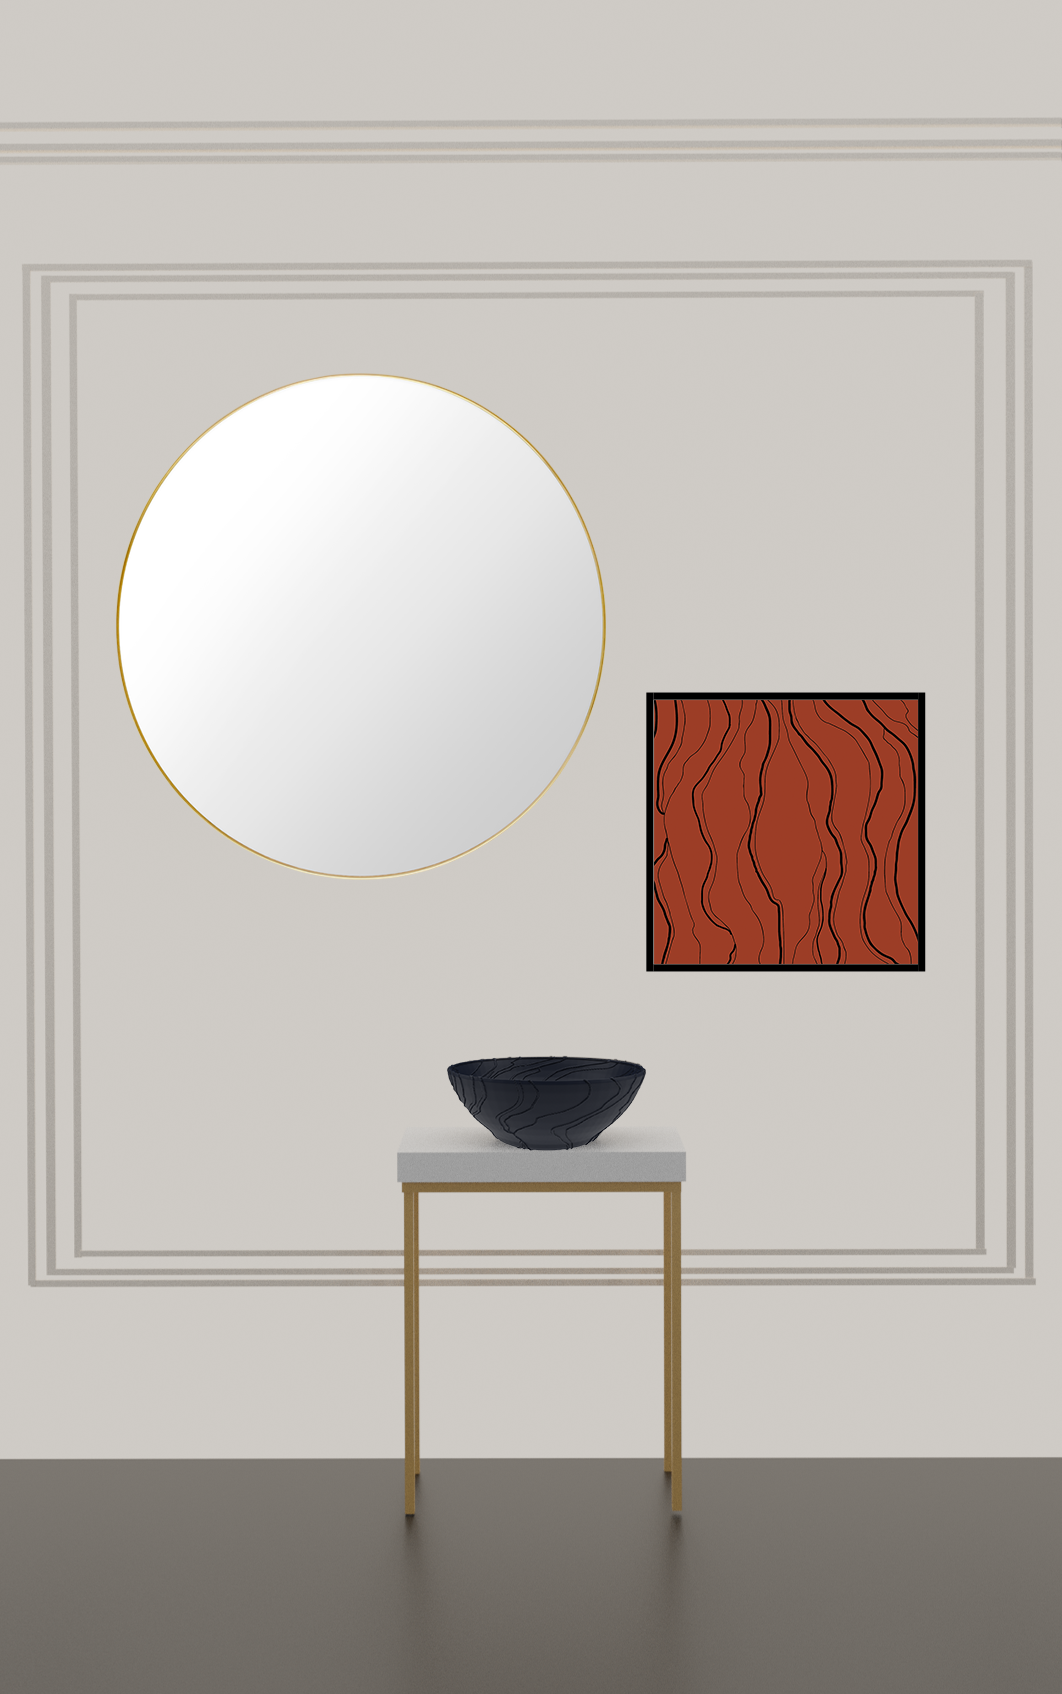 Display of Pastizzi inspired bowl and print(400x500)